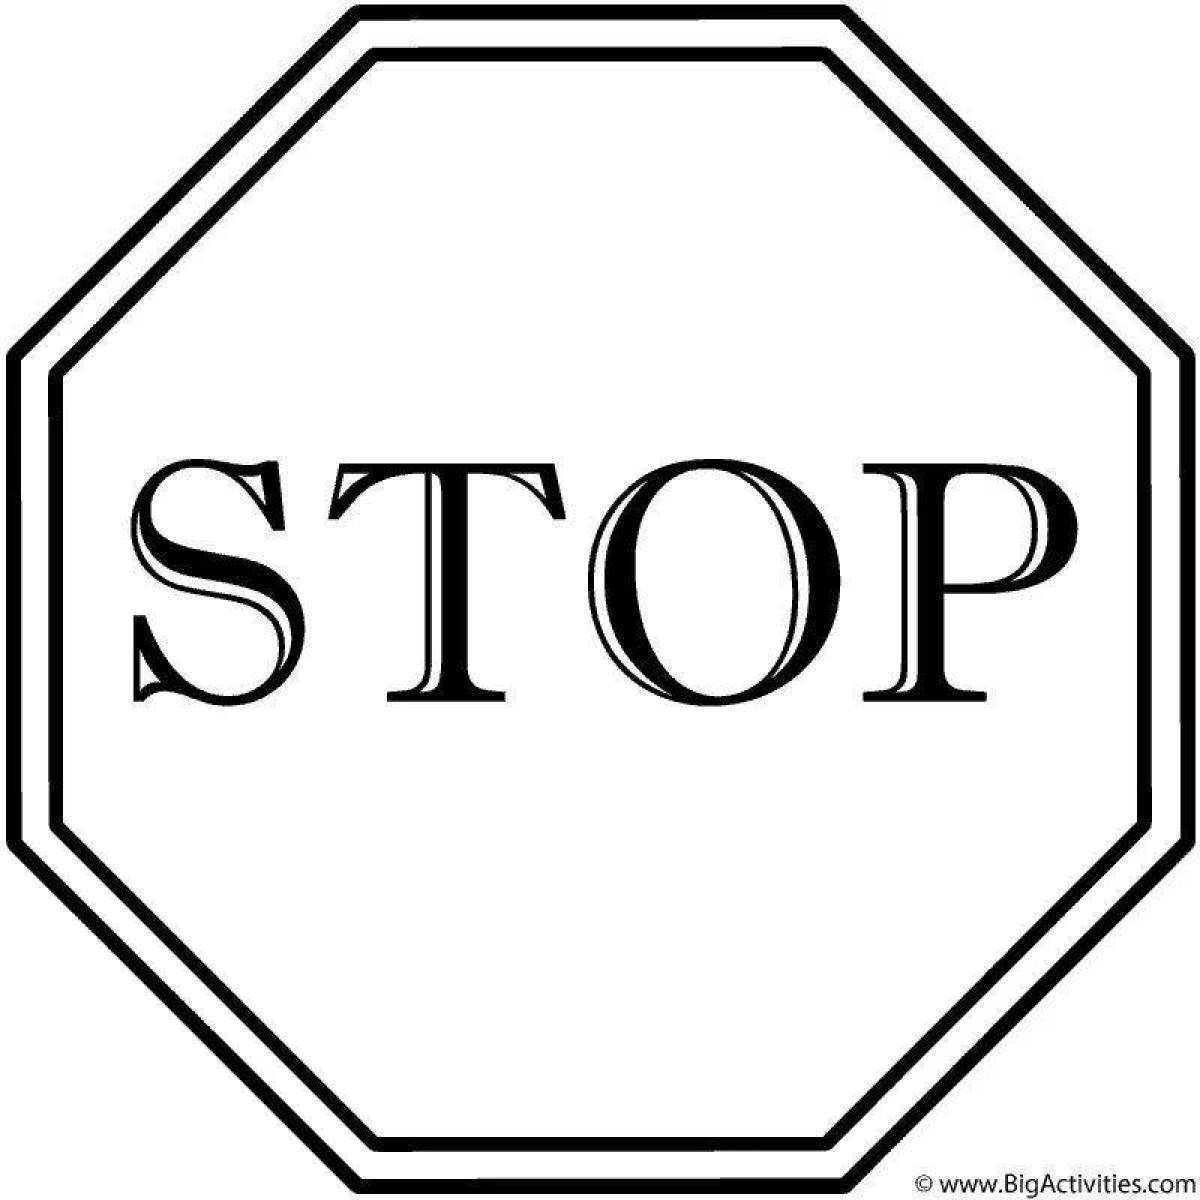 Stop sign coloring page